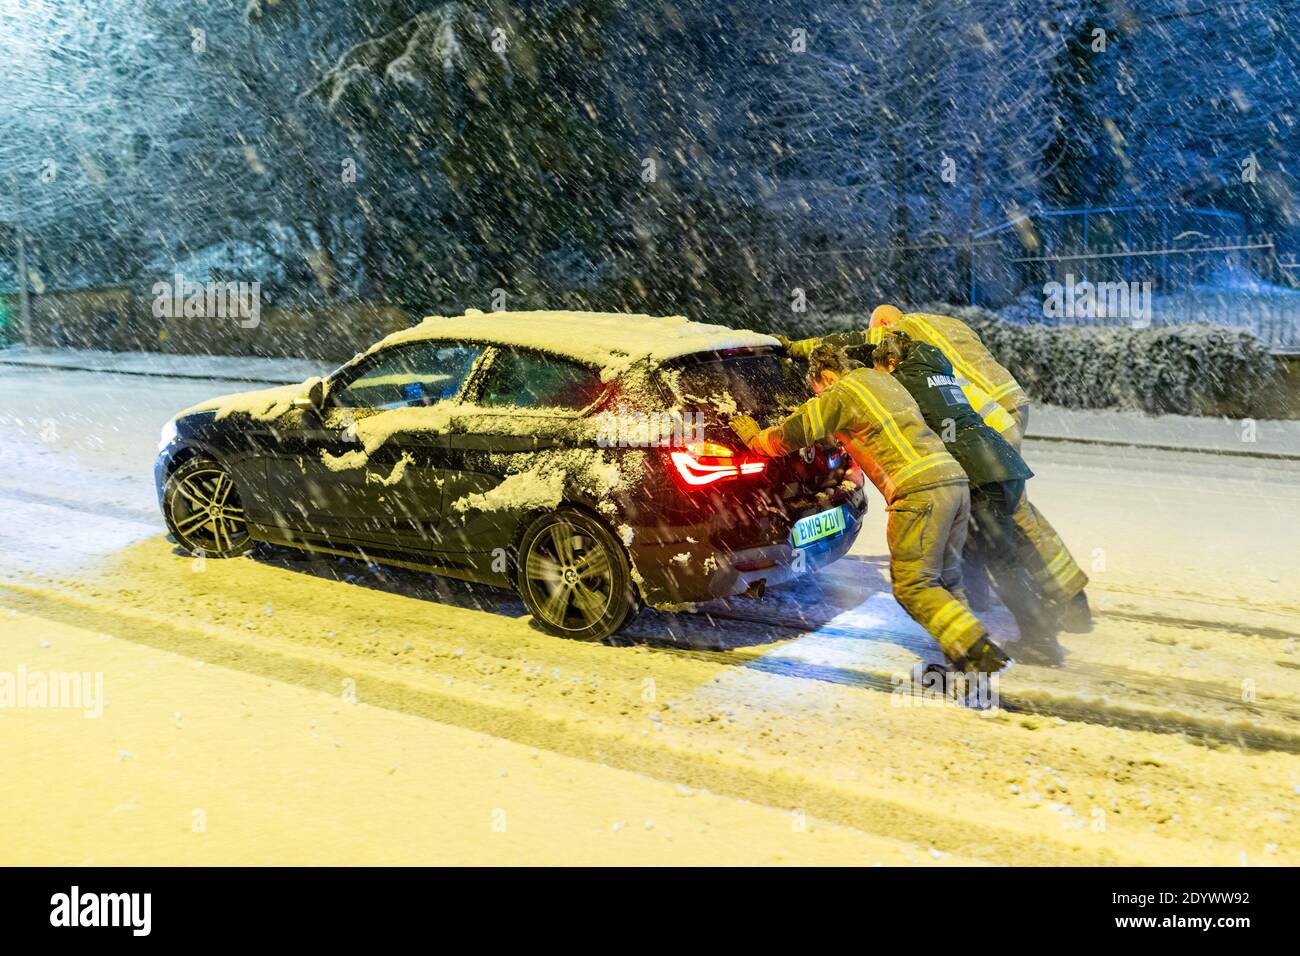 Cradley Heath, West Midlands, UK. 28th Dec, 2020. A fire crew pushes a stranded paramedic's car up a snowy hill this morning, as she tries to make it into work for her day's shift. Snow settles and causes traffic delays in Cradley Heath in the West Midlands Credit: Peter Lopeman/Alamy Live News Stock Photo